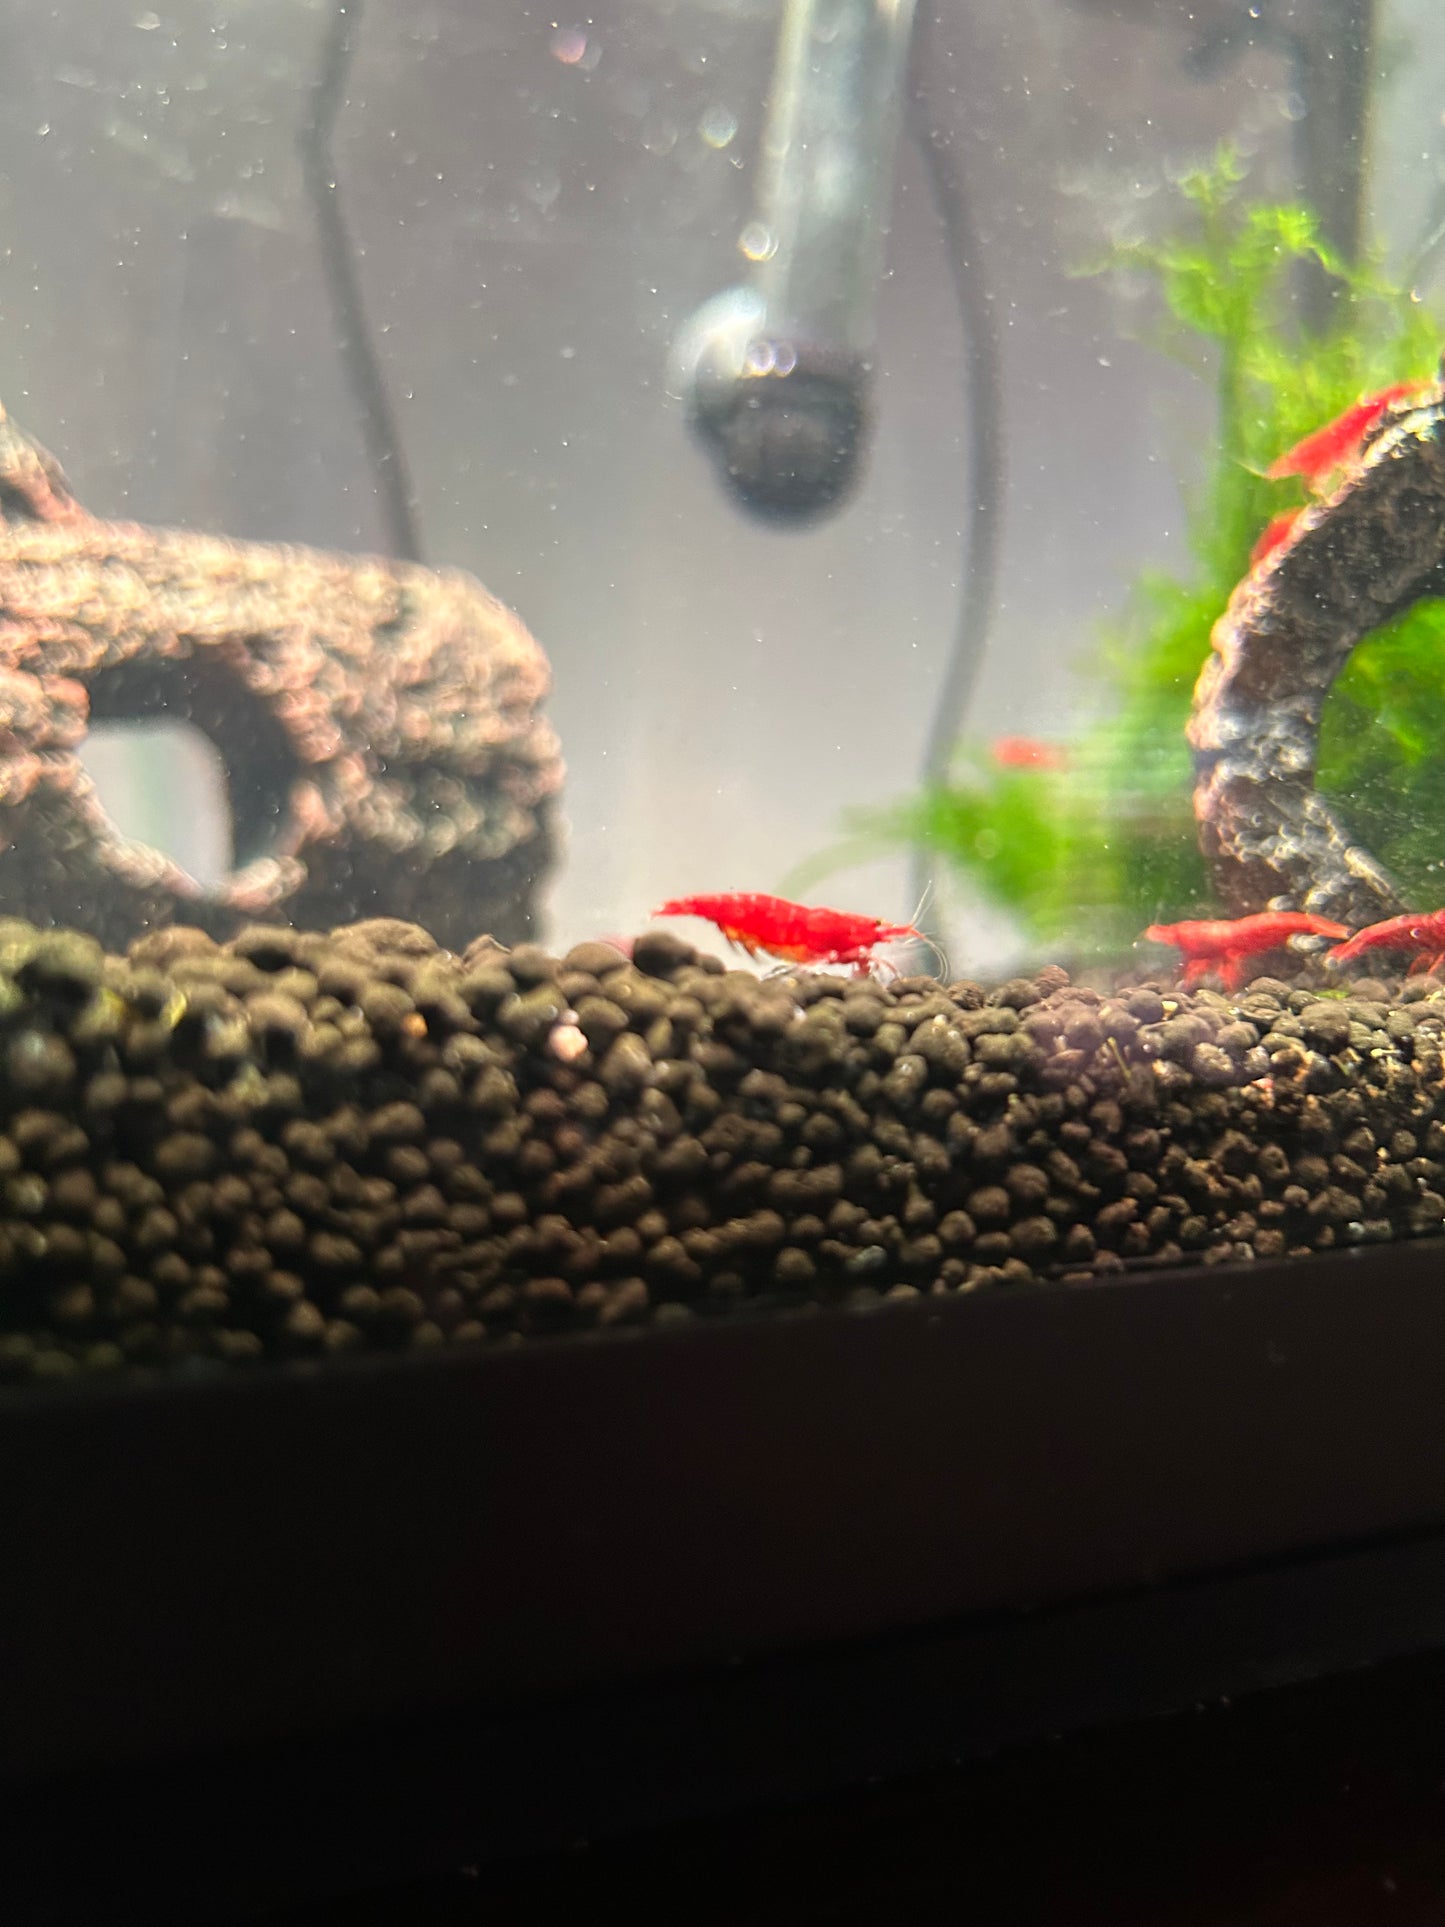 #001 (Red) 1 (Single) Cherry Shrimp (size: 1/4 inch to 1 inch) (Unsexed)